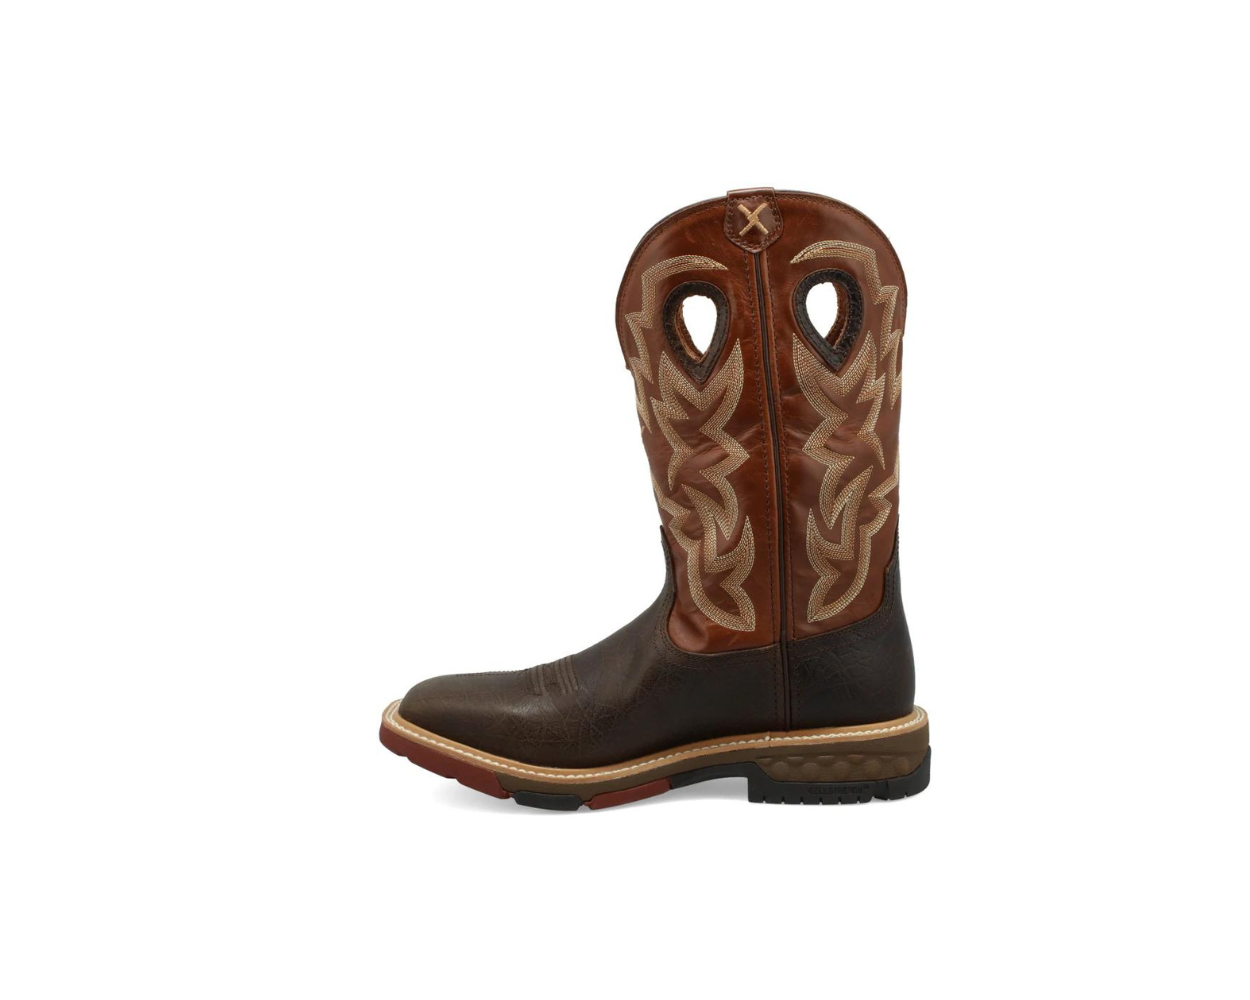 Twisted X Men’s 12” Pull-On Work Boot - Cowboy Boots Crafted with Molded  Rubber Outsole, Full-Grain Leather Vamp and ShaftAir-Mesh Lined Shaft